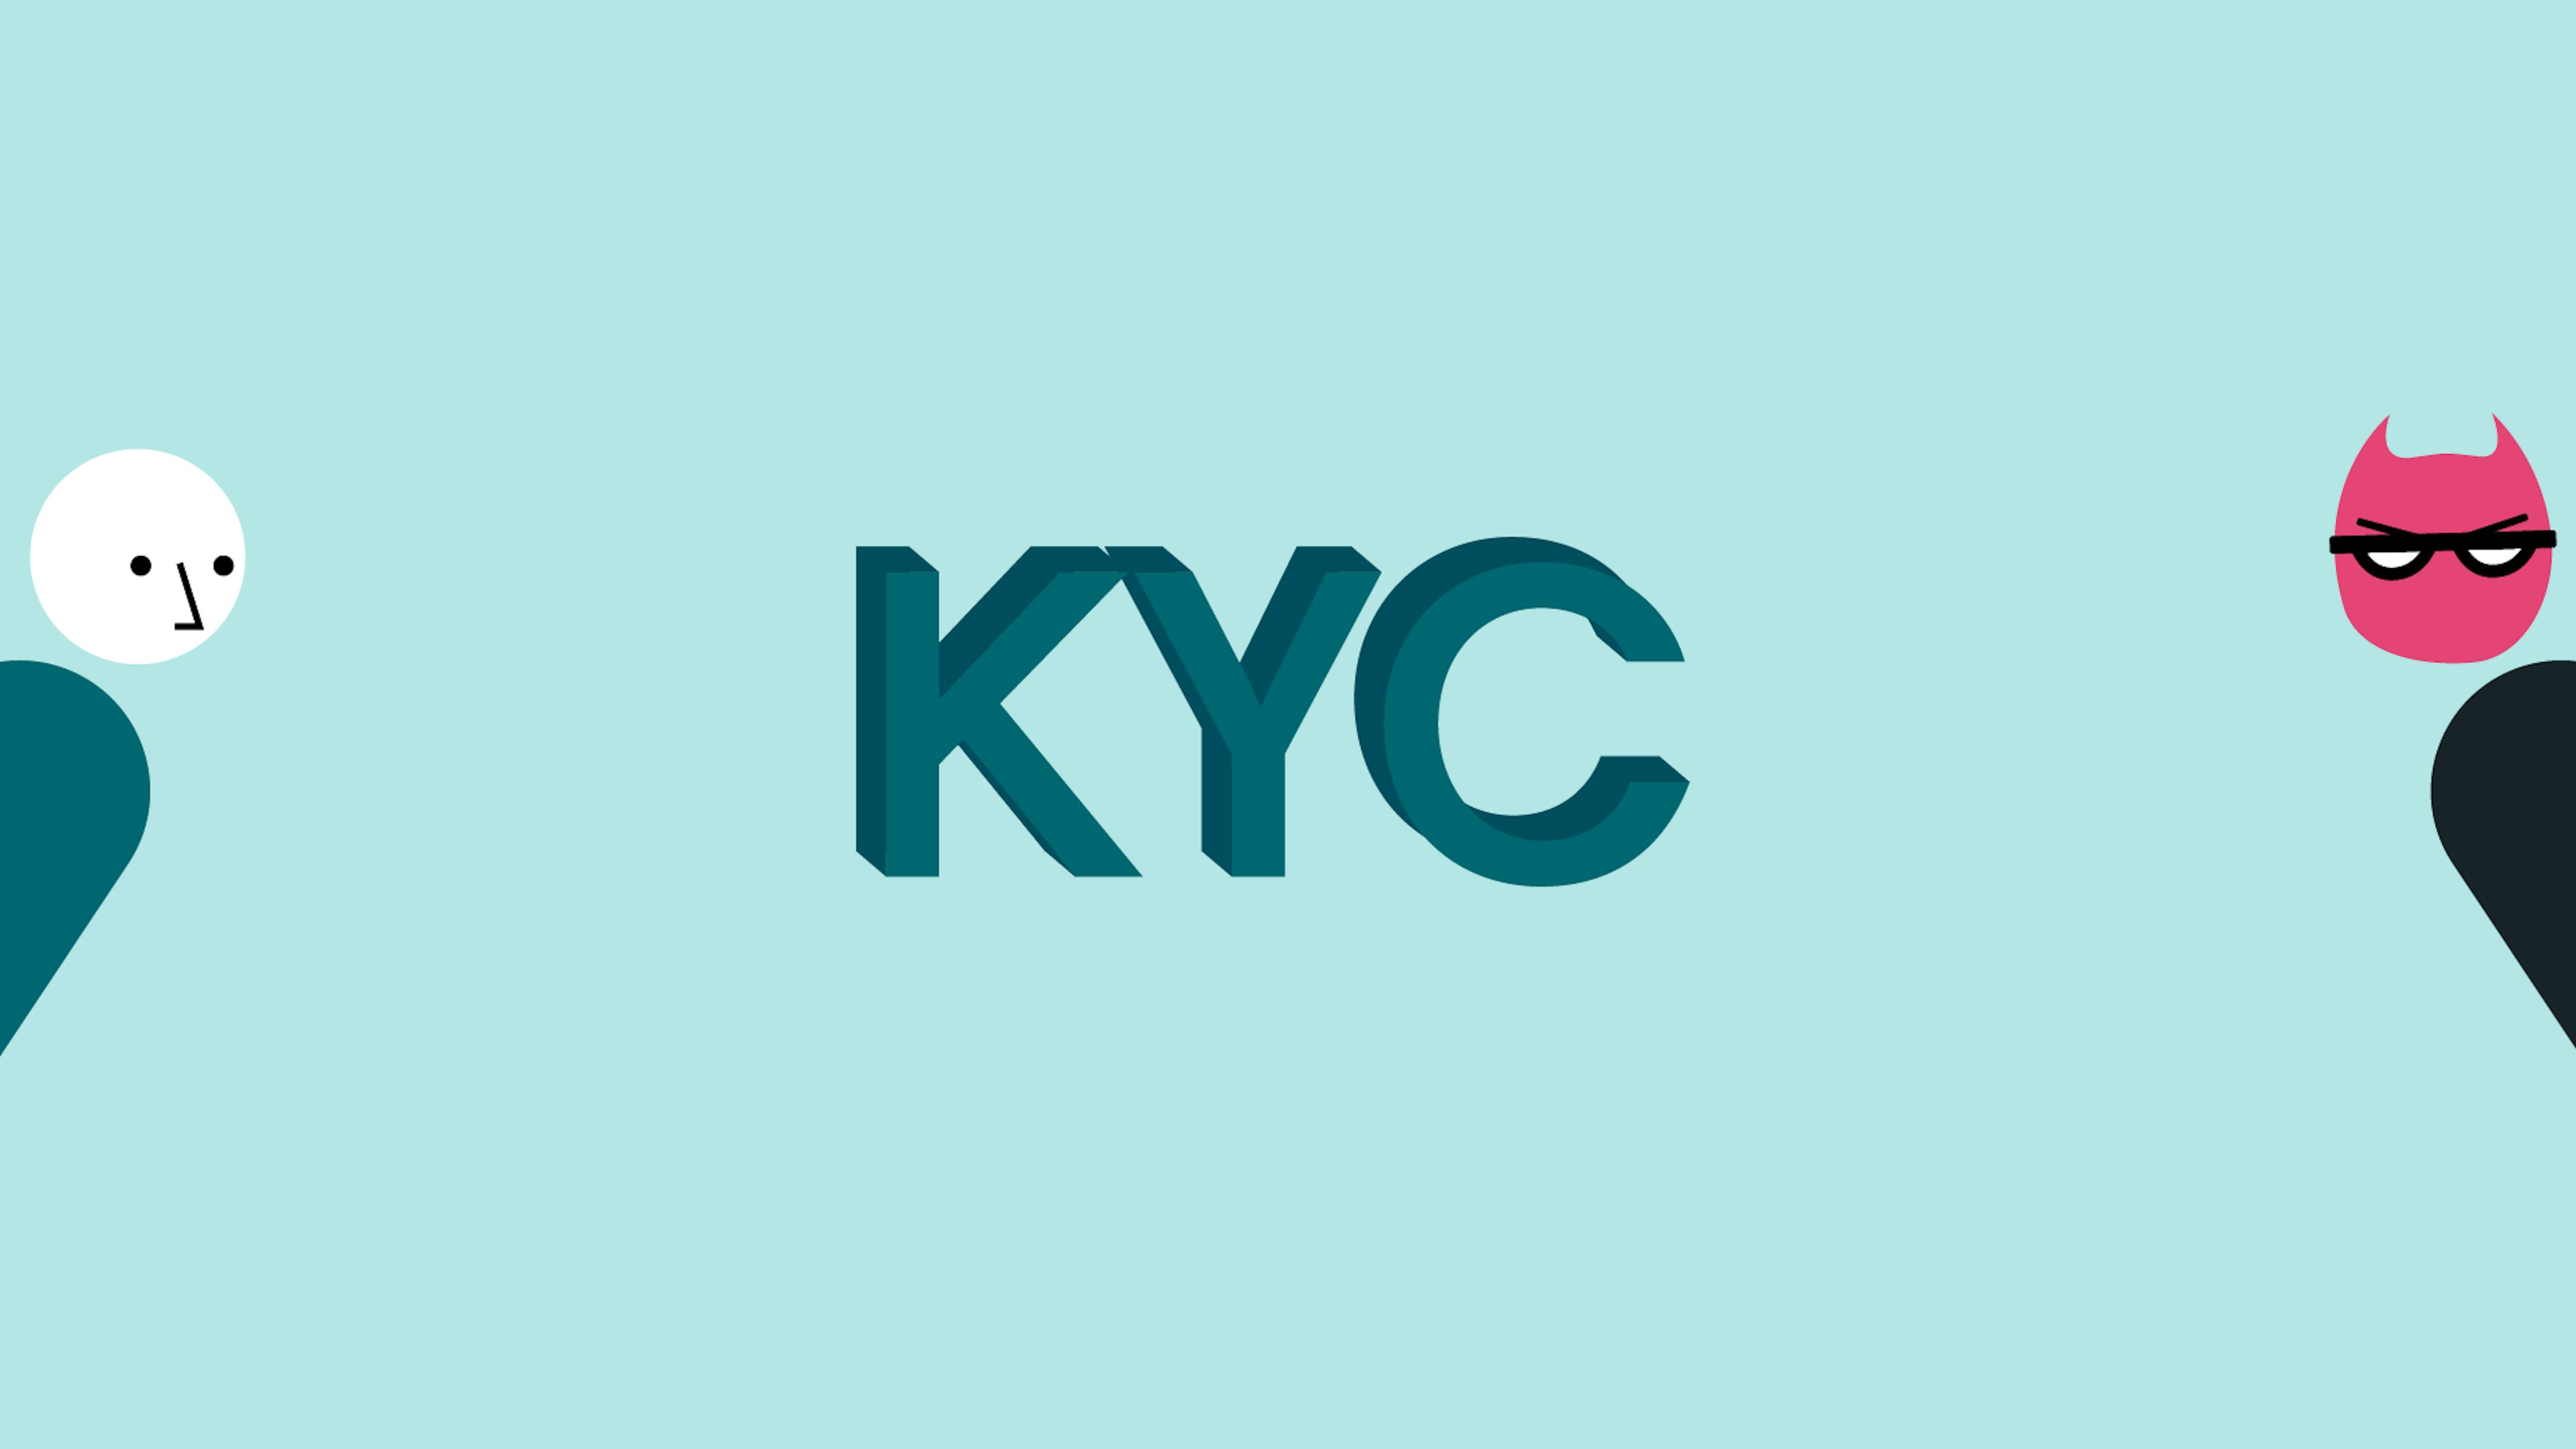 Achieving KYC Compliance: Here’s Why, and Here’s How